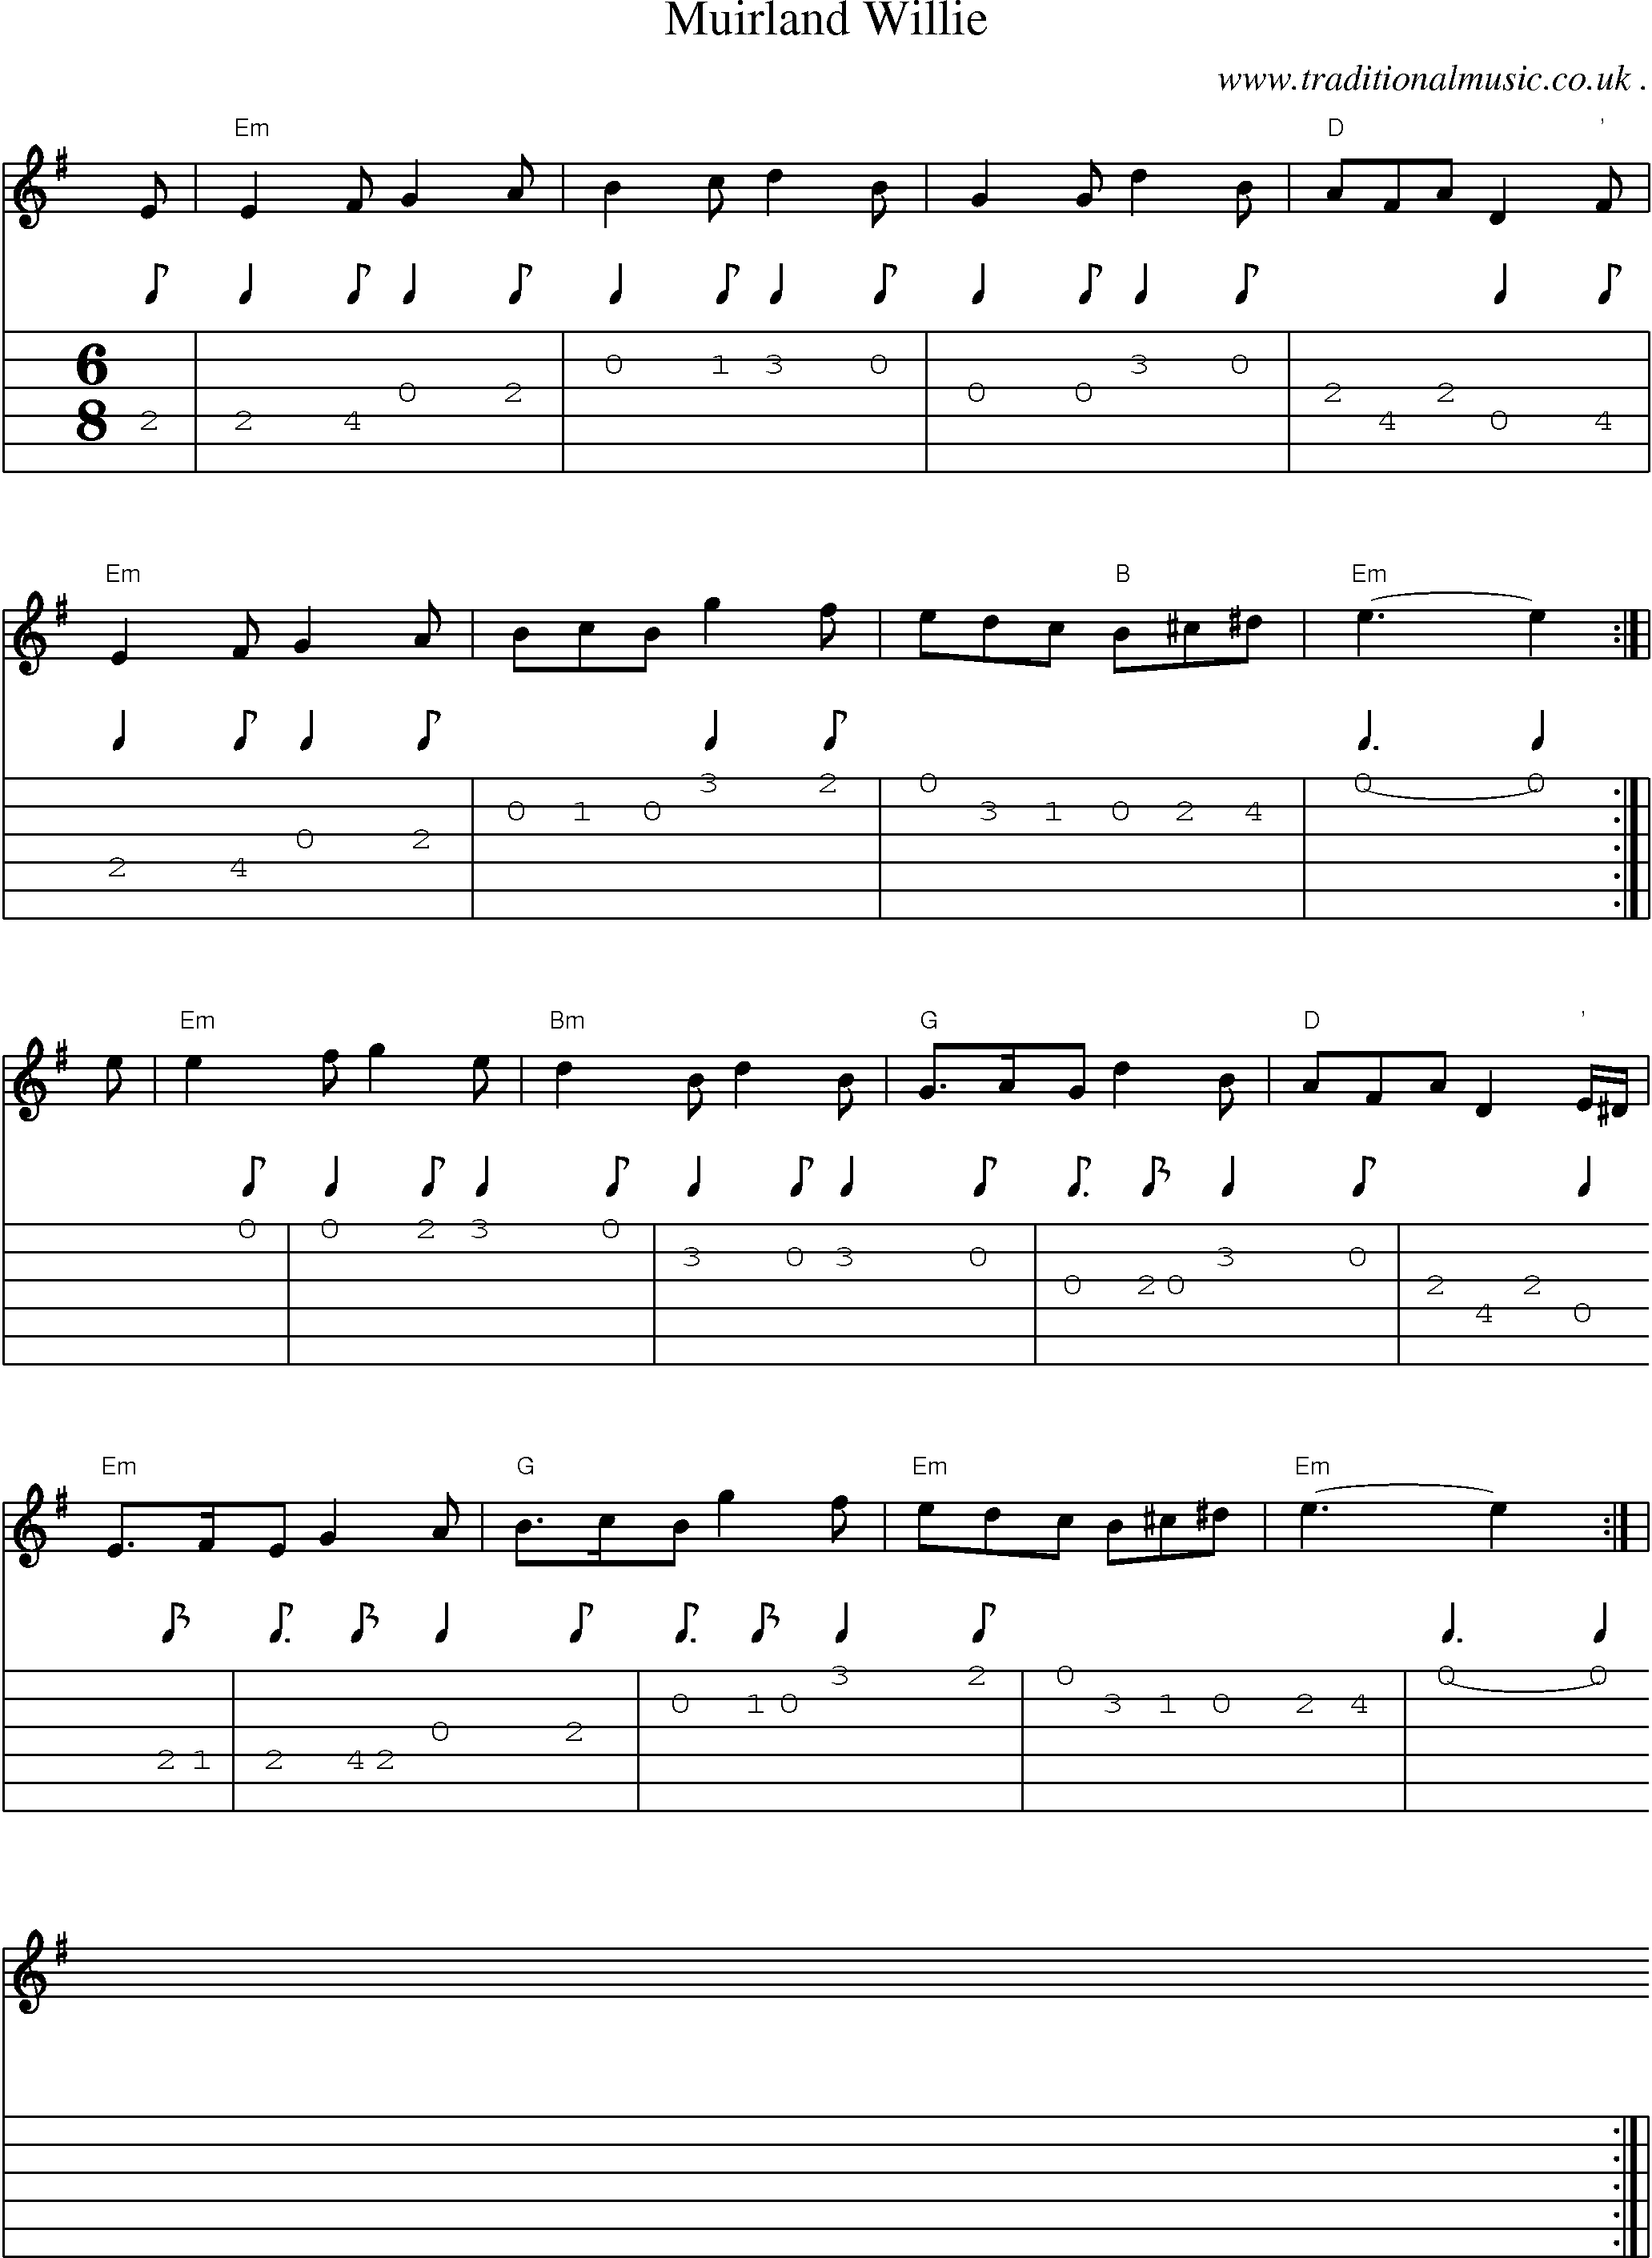 Sheet-music  score, Chords and Guitar Tabs for Muirland Willie